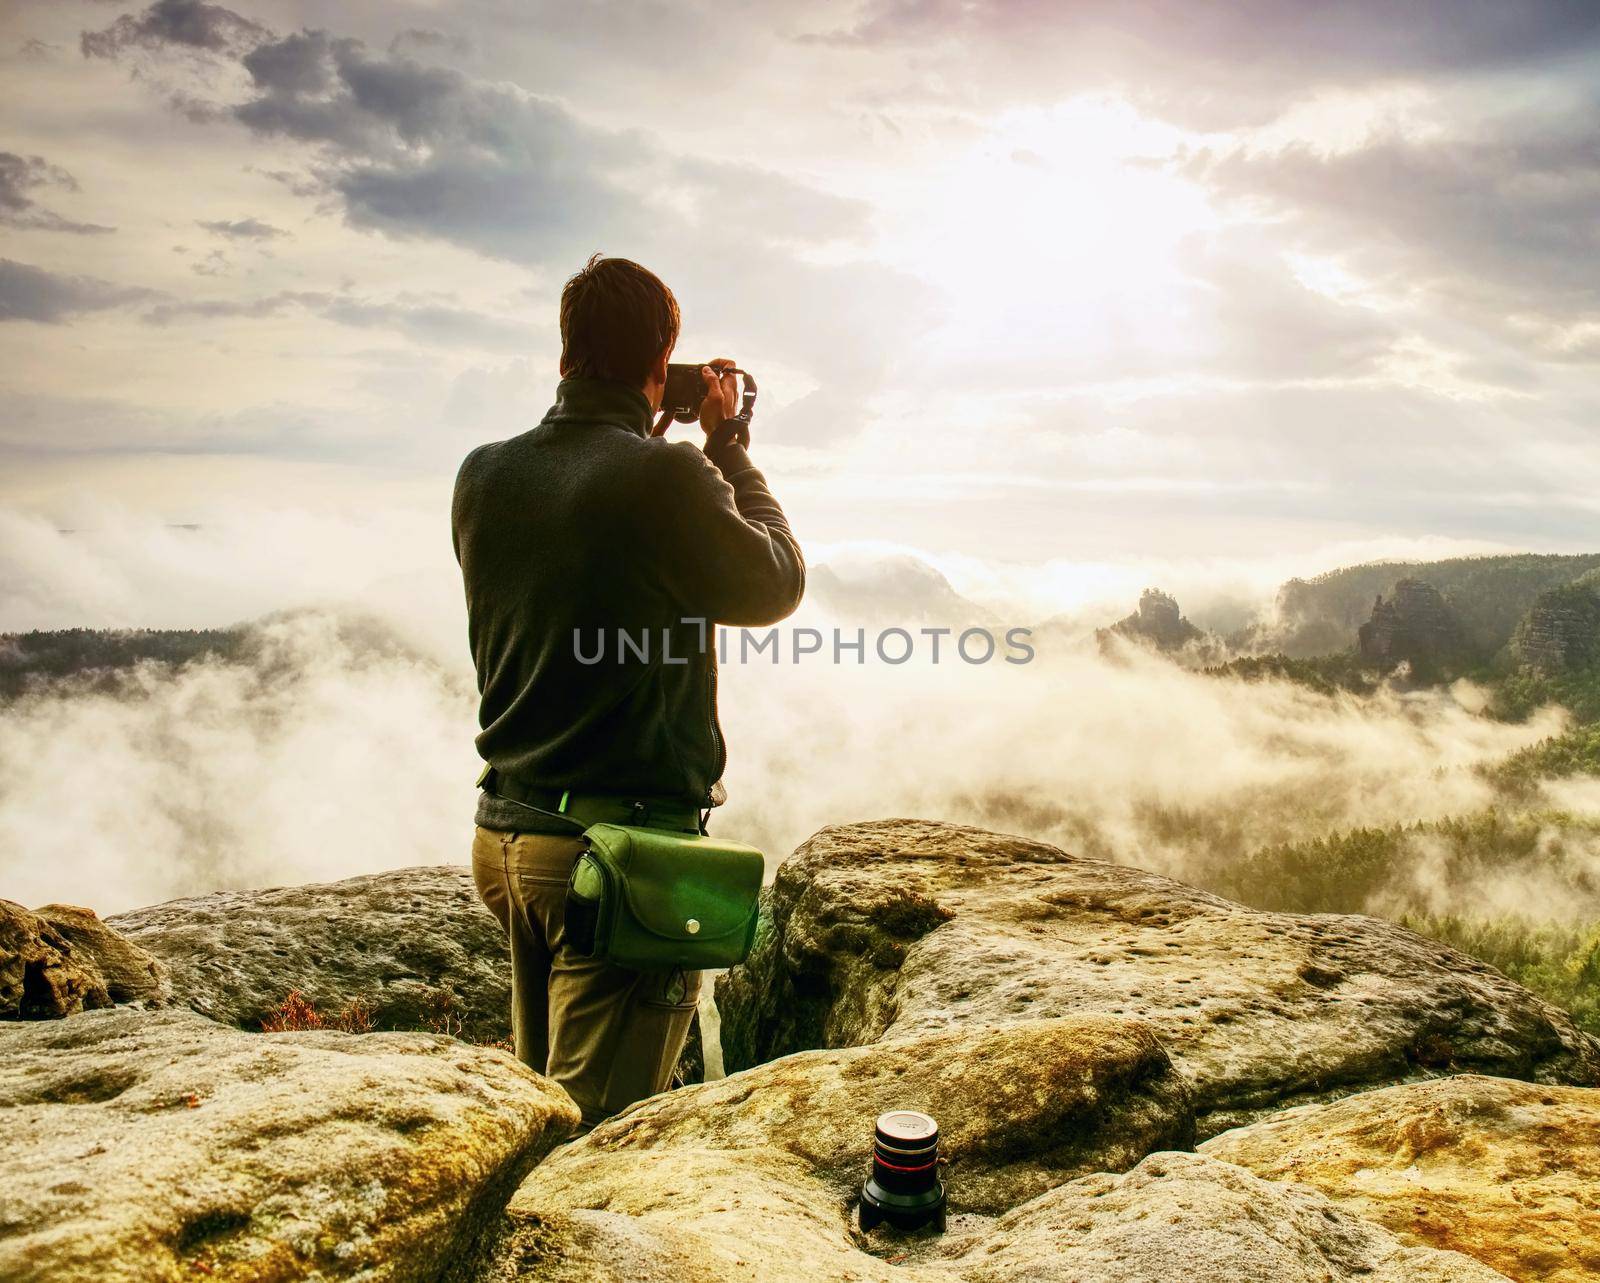 Photographer looks into fall landscape through camera viewfinder. Man prepare camera to takes impressive photos of misty fall mountains.